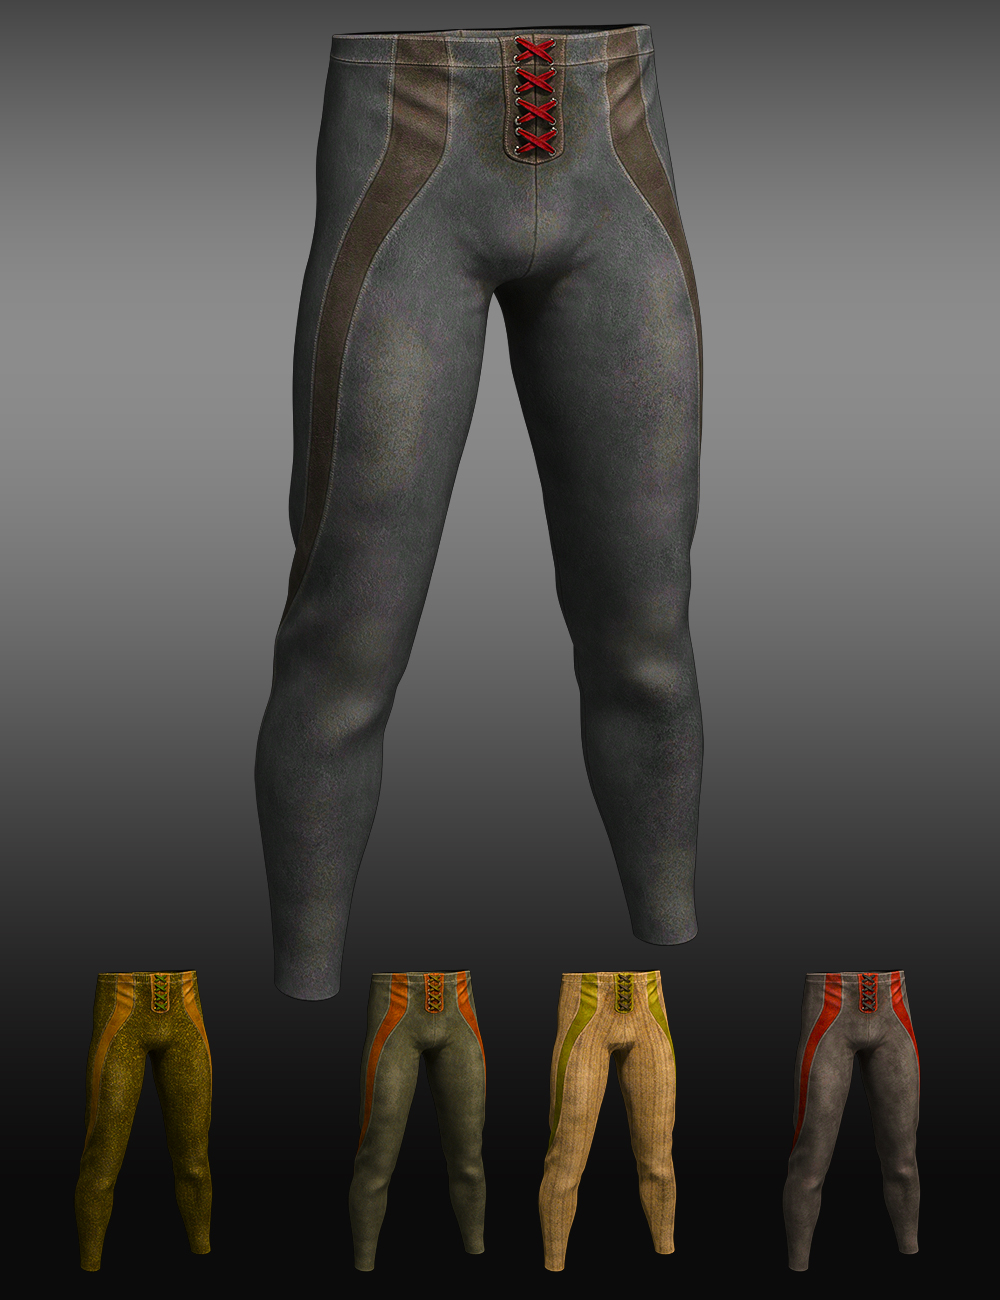 Iron Scale Armor Outfit Pants for Genesis 8 and 8.1 Males